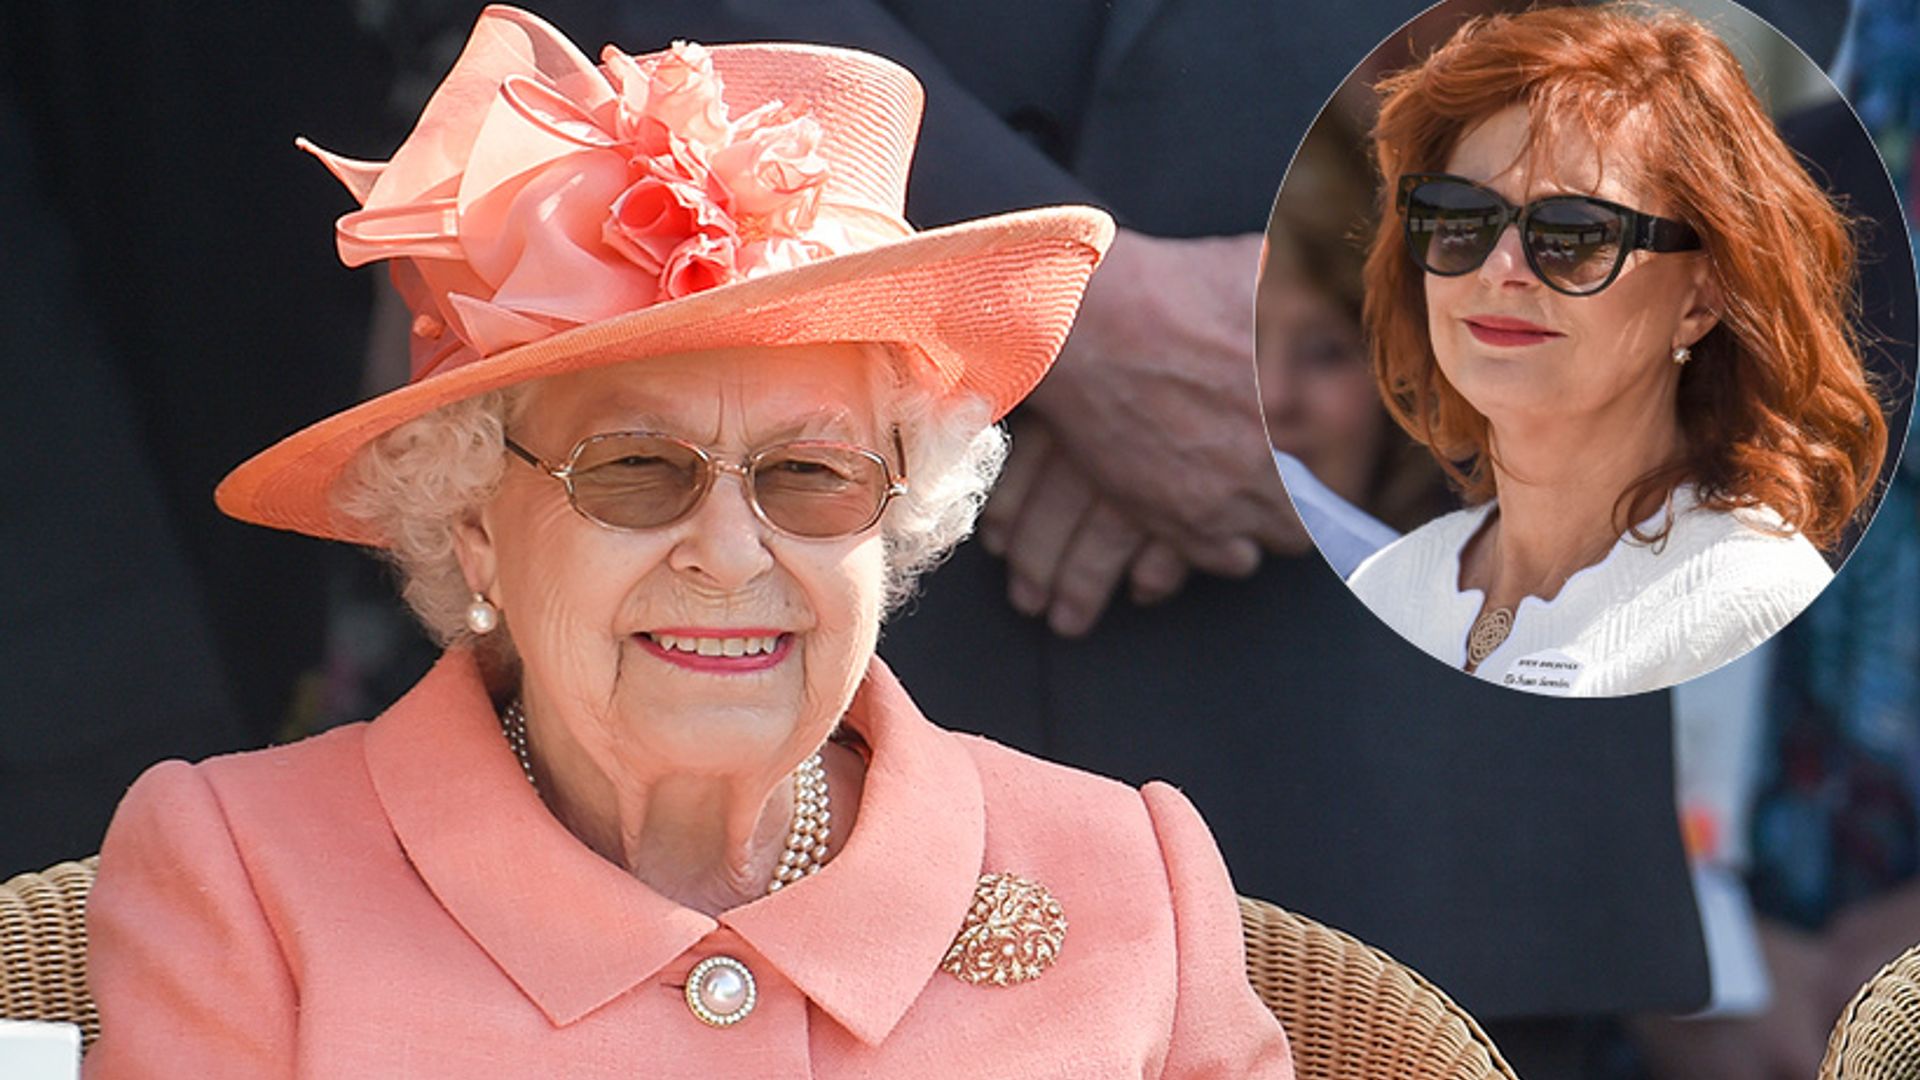 Susan Sarandon ignored royal etiquette – but the Queen didn't seem to mind